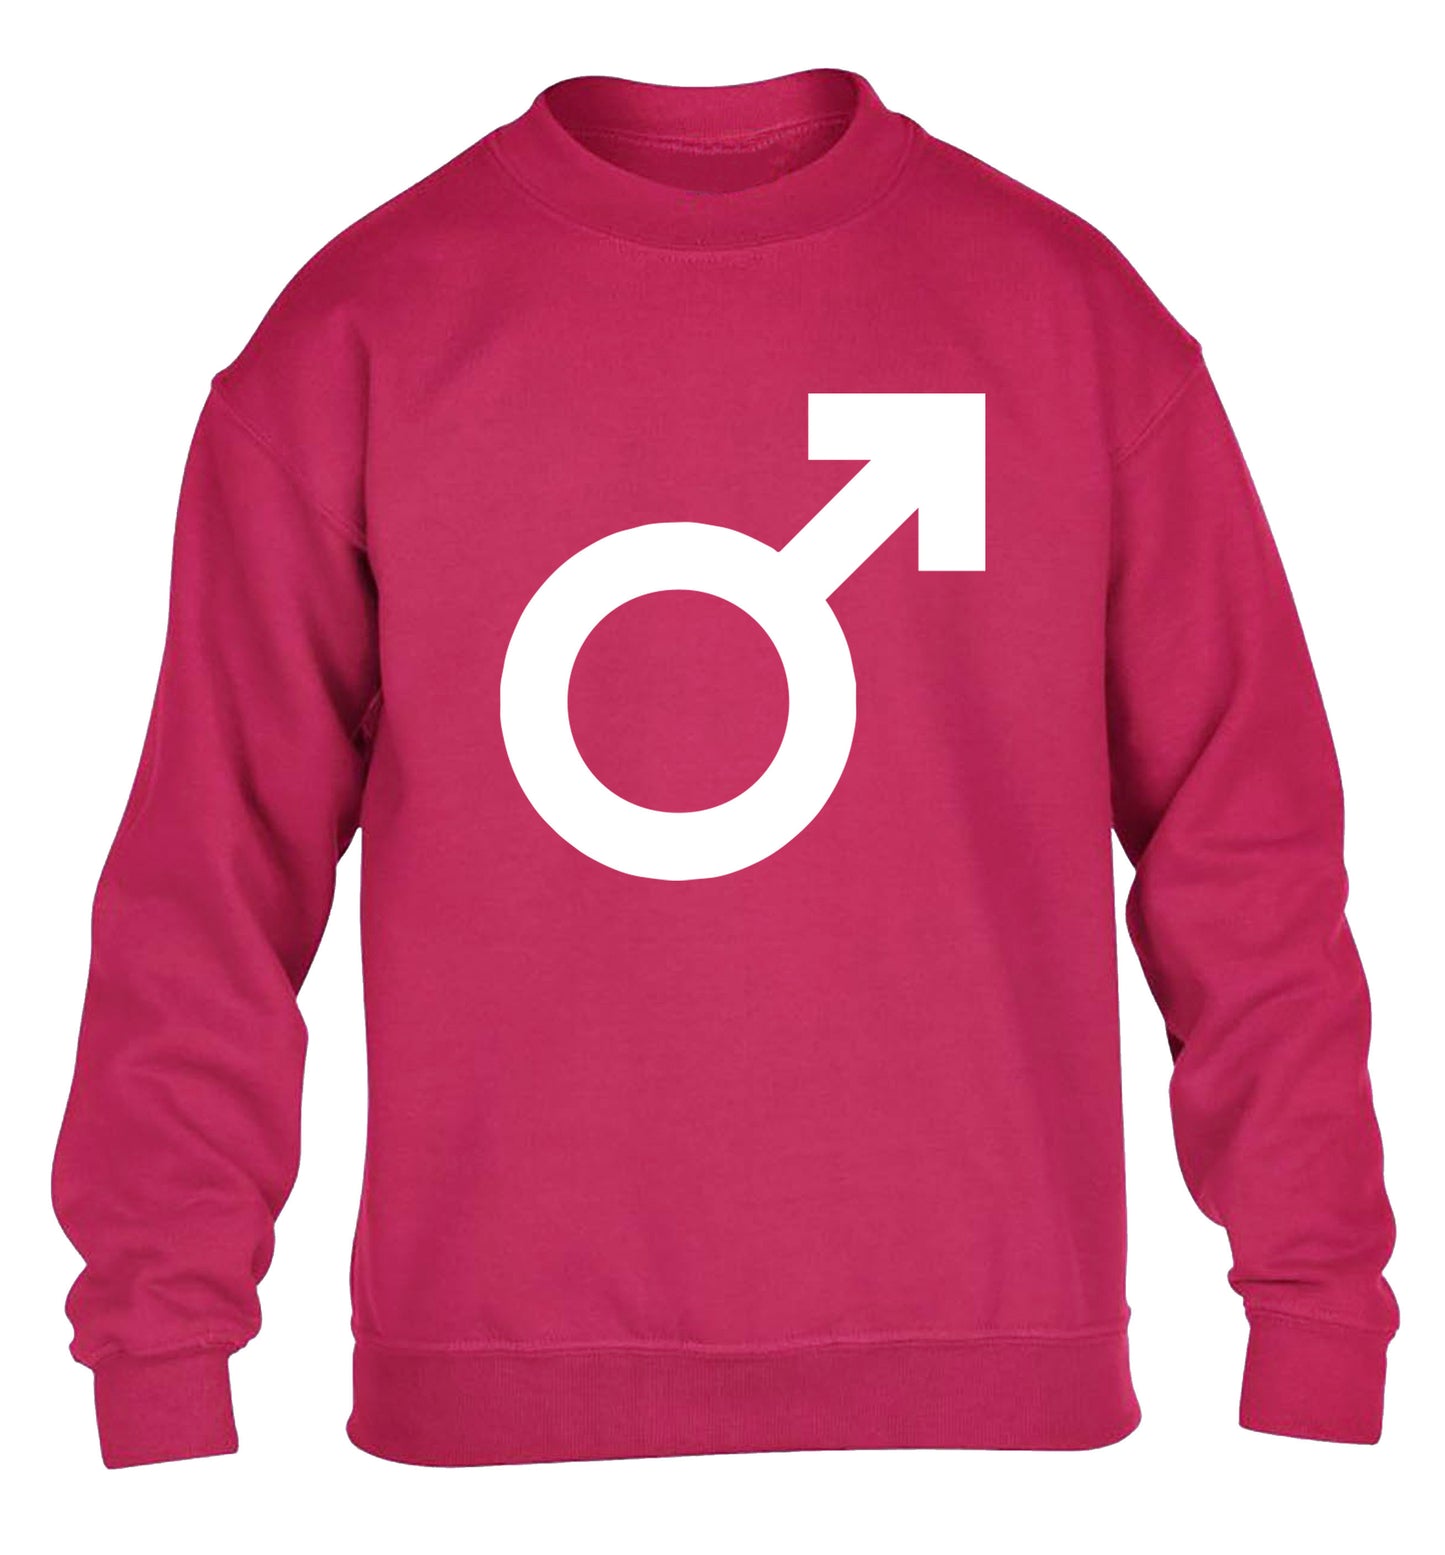 Male symbol large children's pink sweater 12-14 Years